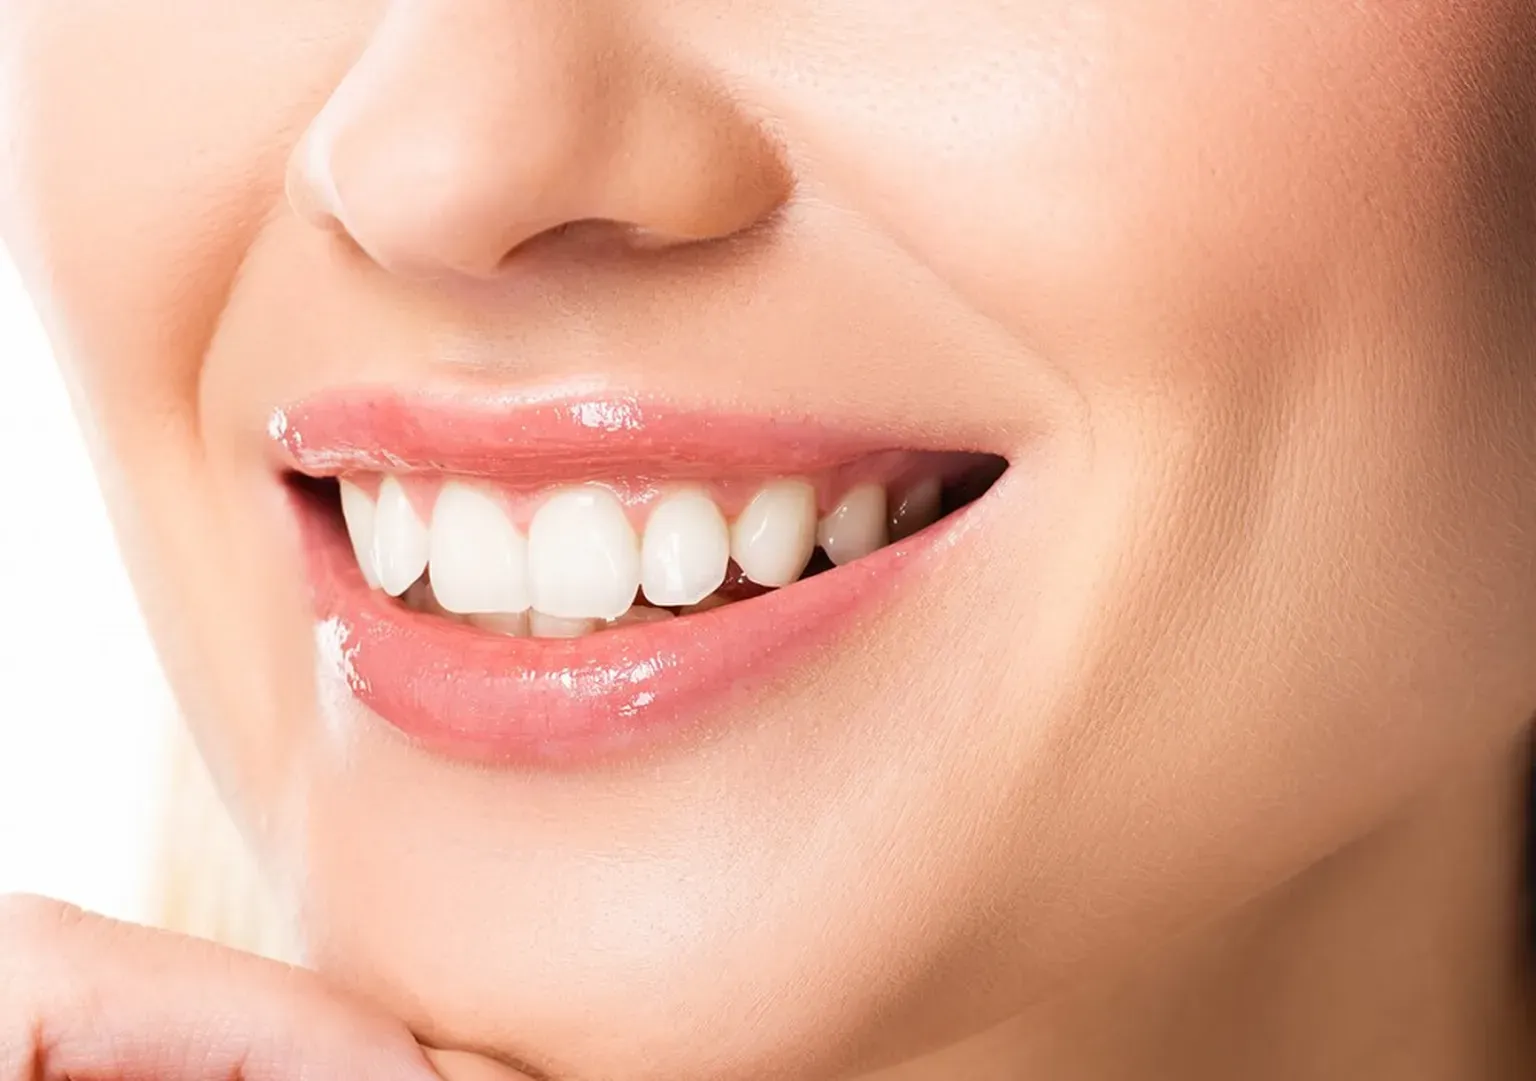 Newport Beach, CA Dentist Offers Professional Teeth Whitening Services